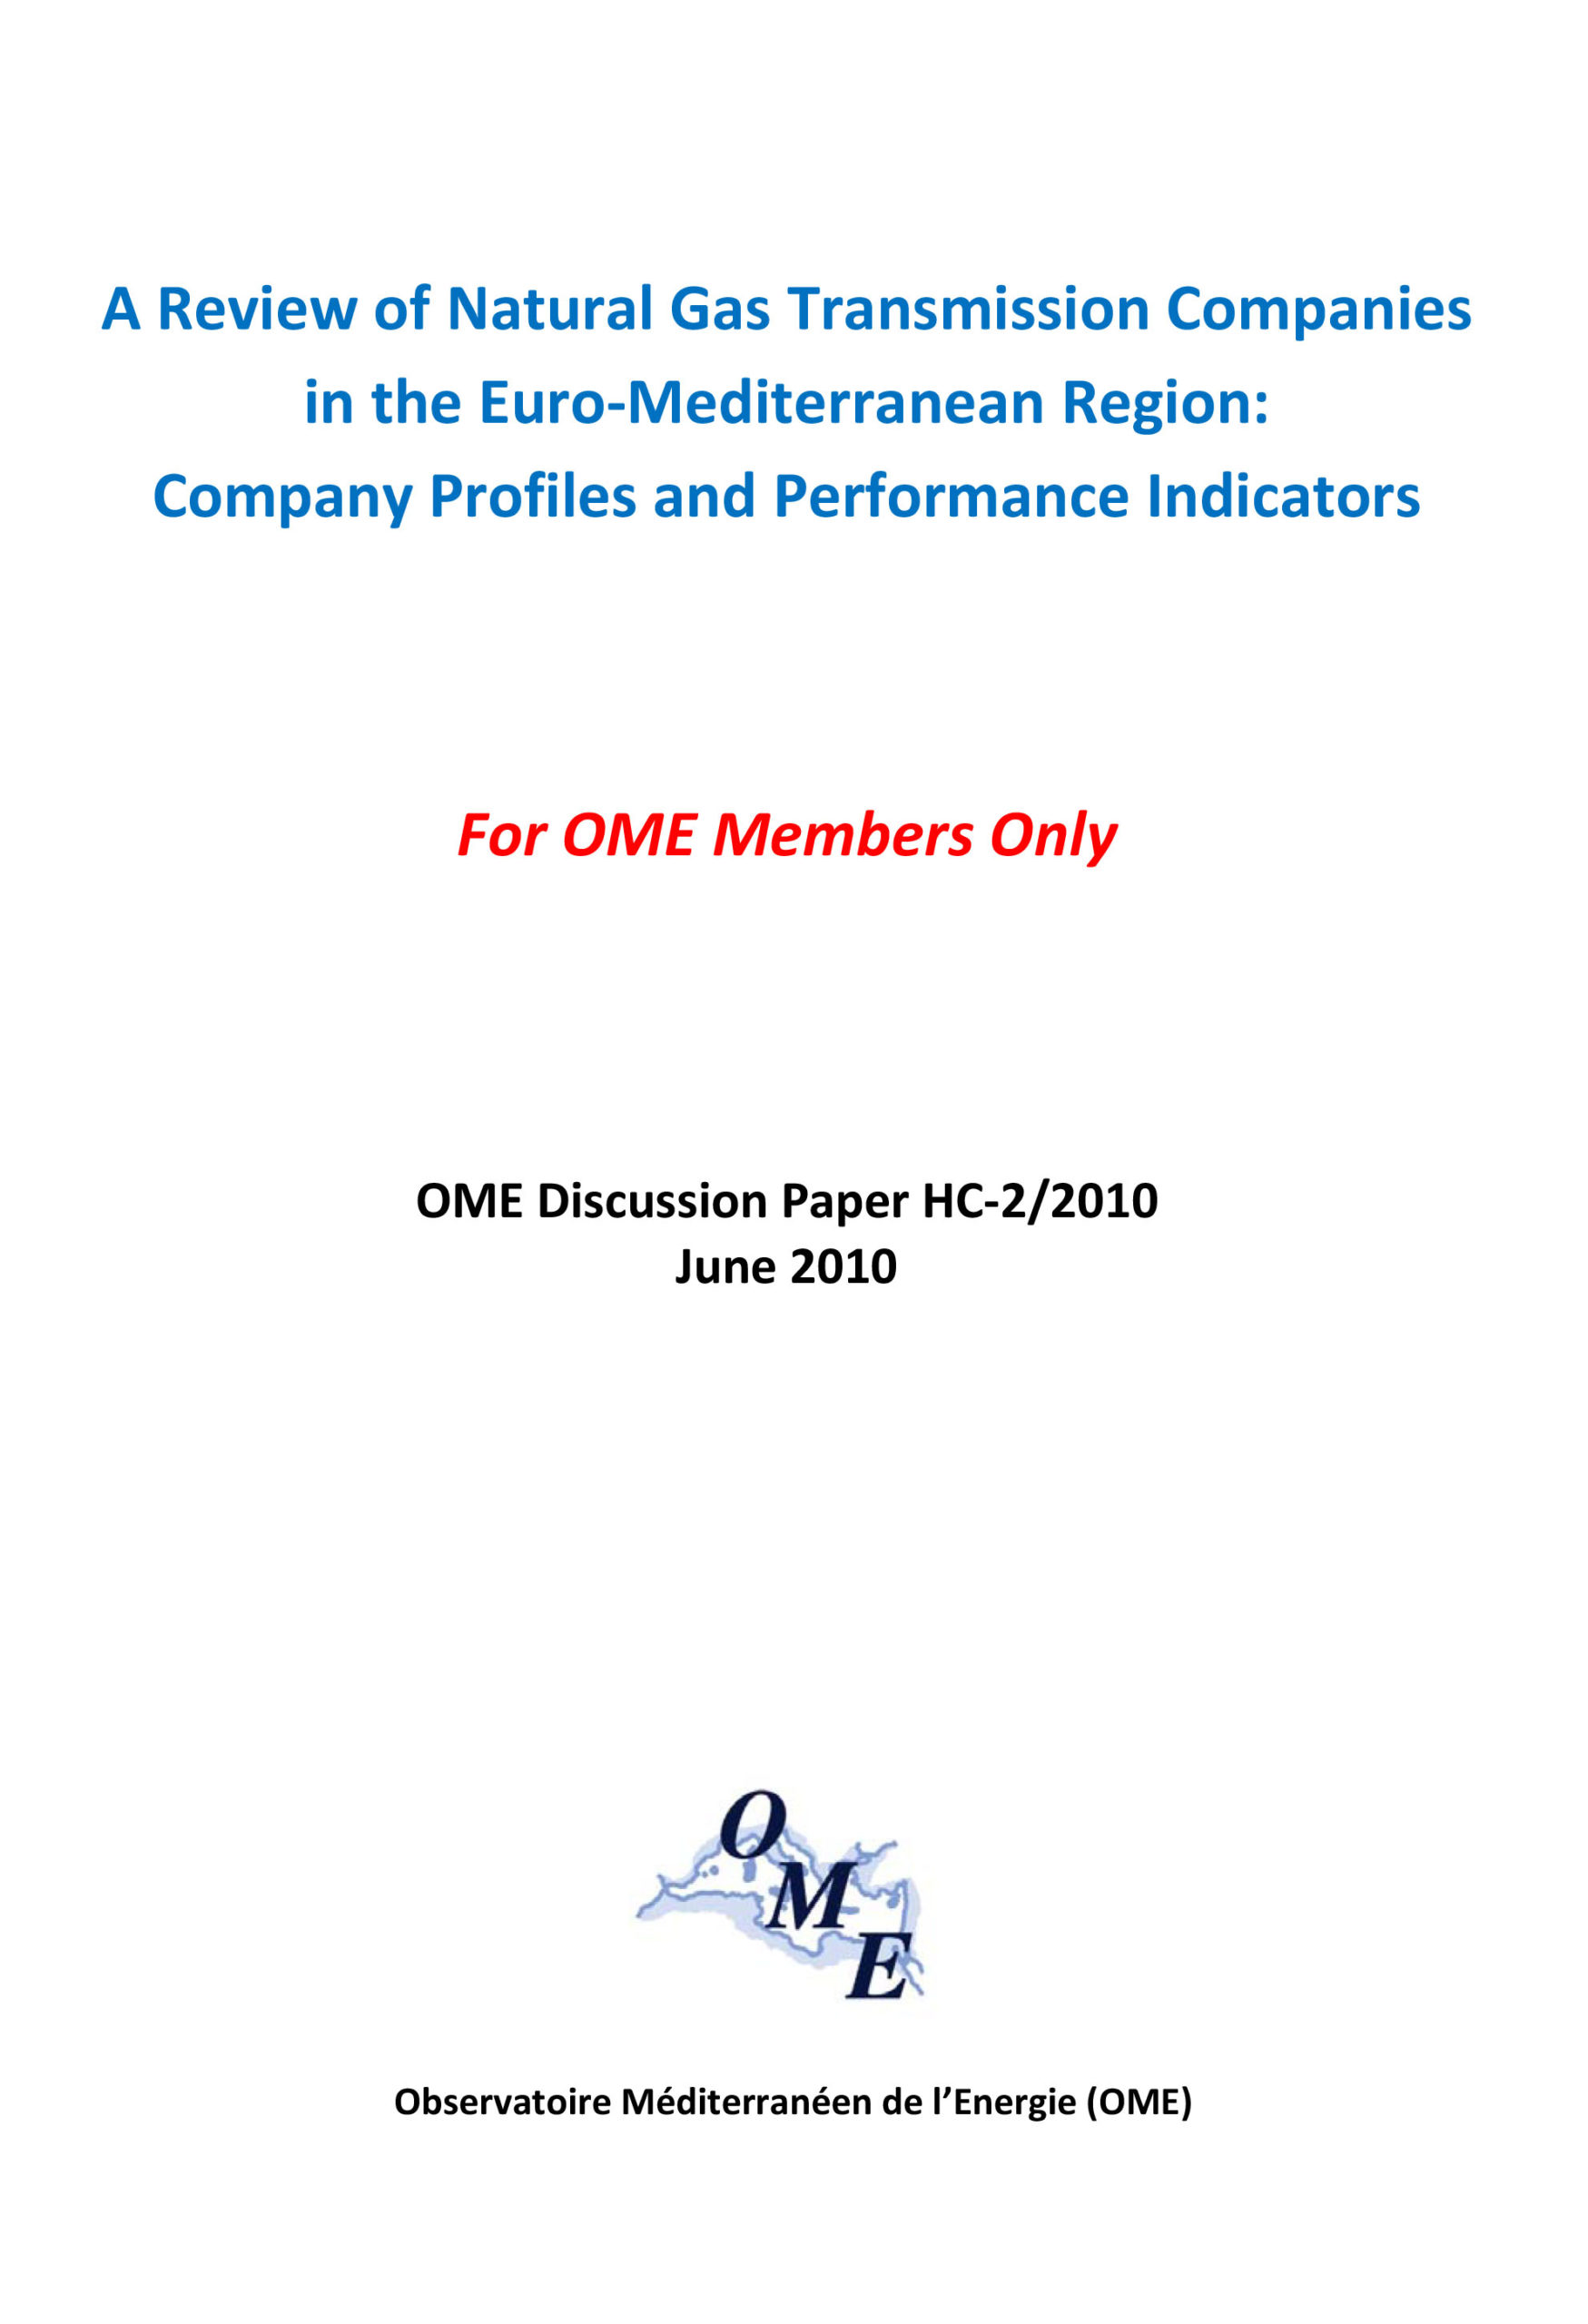 A Review of Natural Gas Transmission Companies in Euro-Mediterranean Region, June 2010